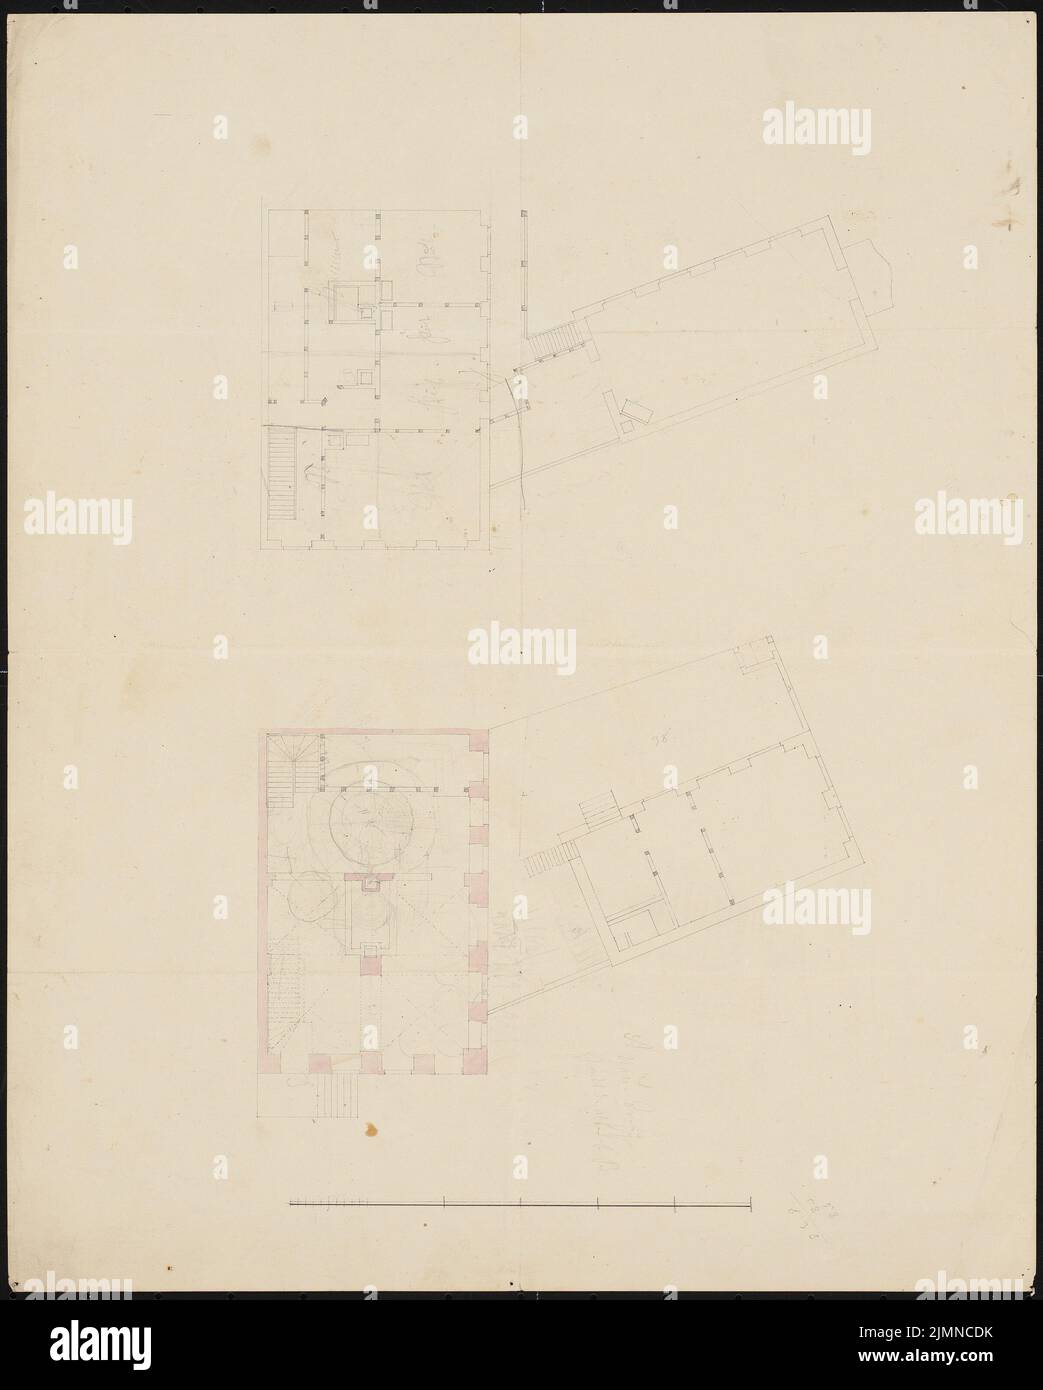 Knoblauch Eduard (1801-1865), Paddengasse residential building in Berlin. Conversion (1843): floor plans. Ink and pencil watercolored, 43.2 x 34.7 cm (including scan edges) Stock Photo